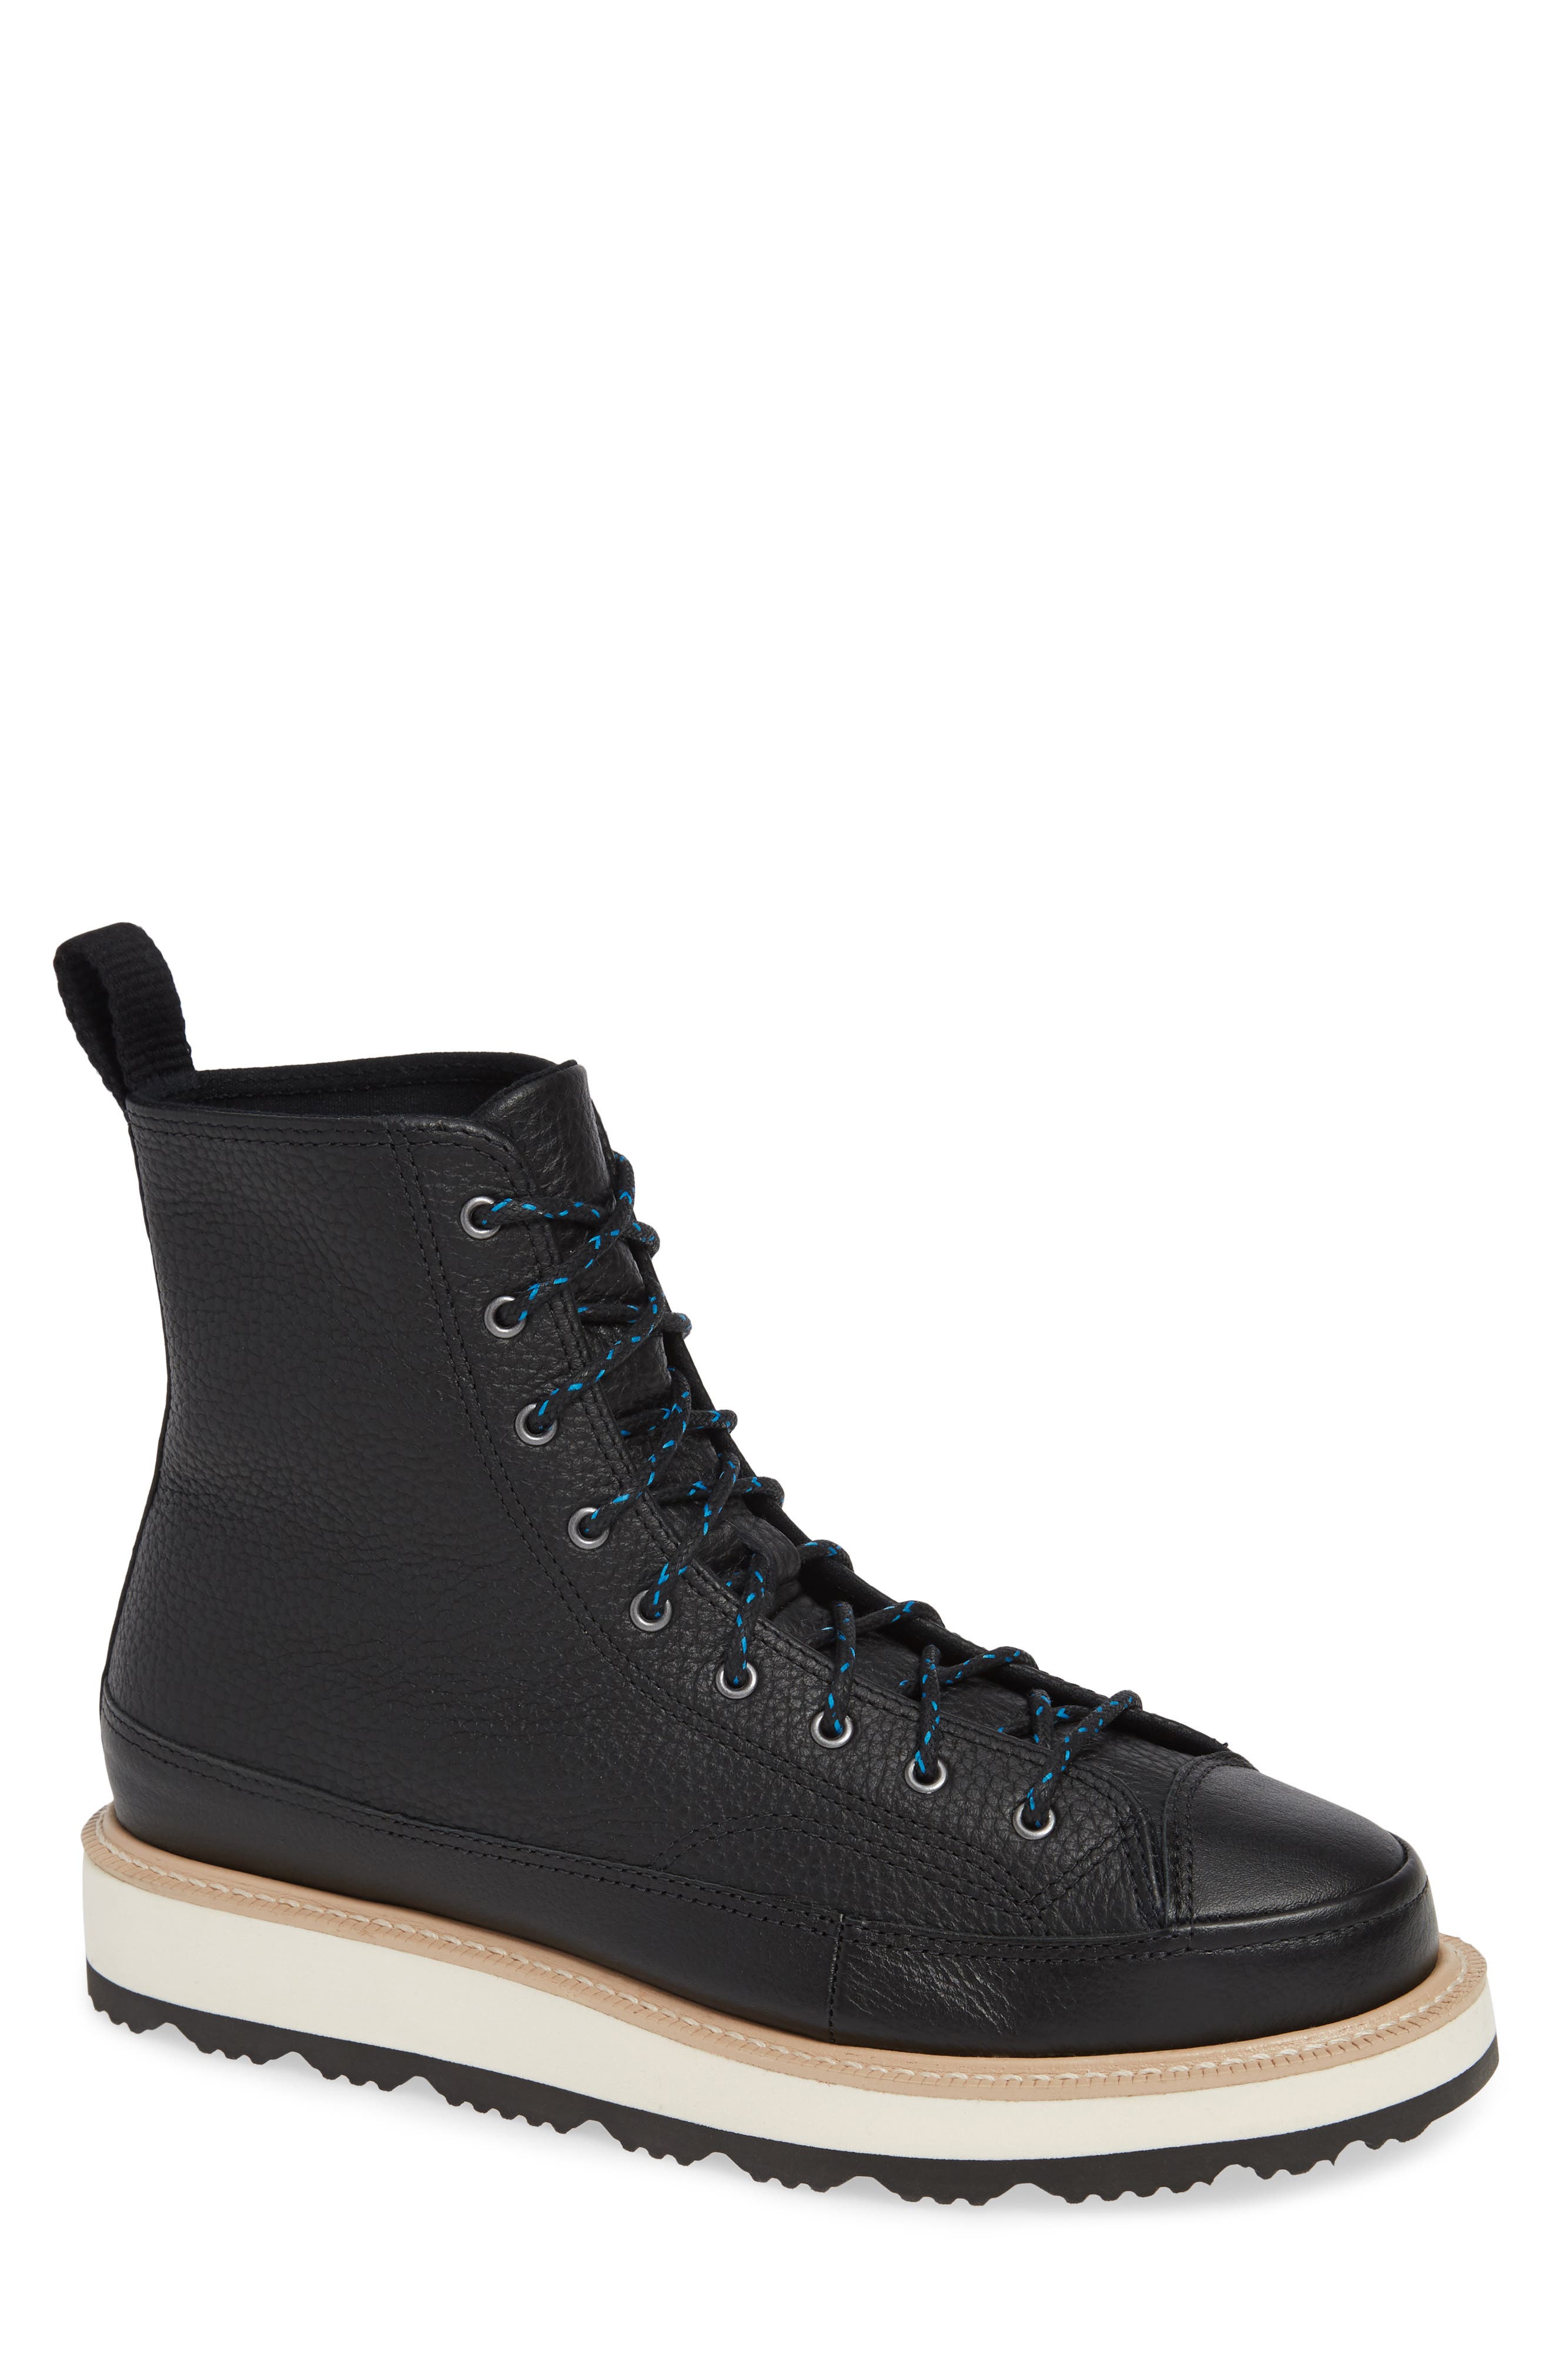 converse crafted high top boot